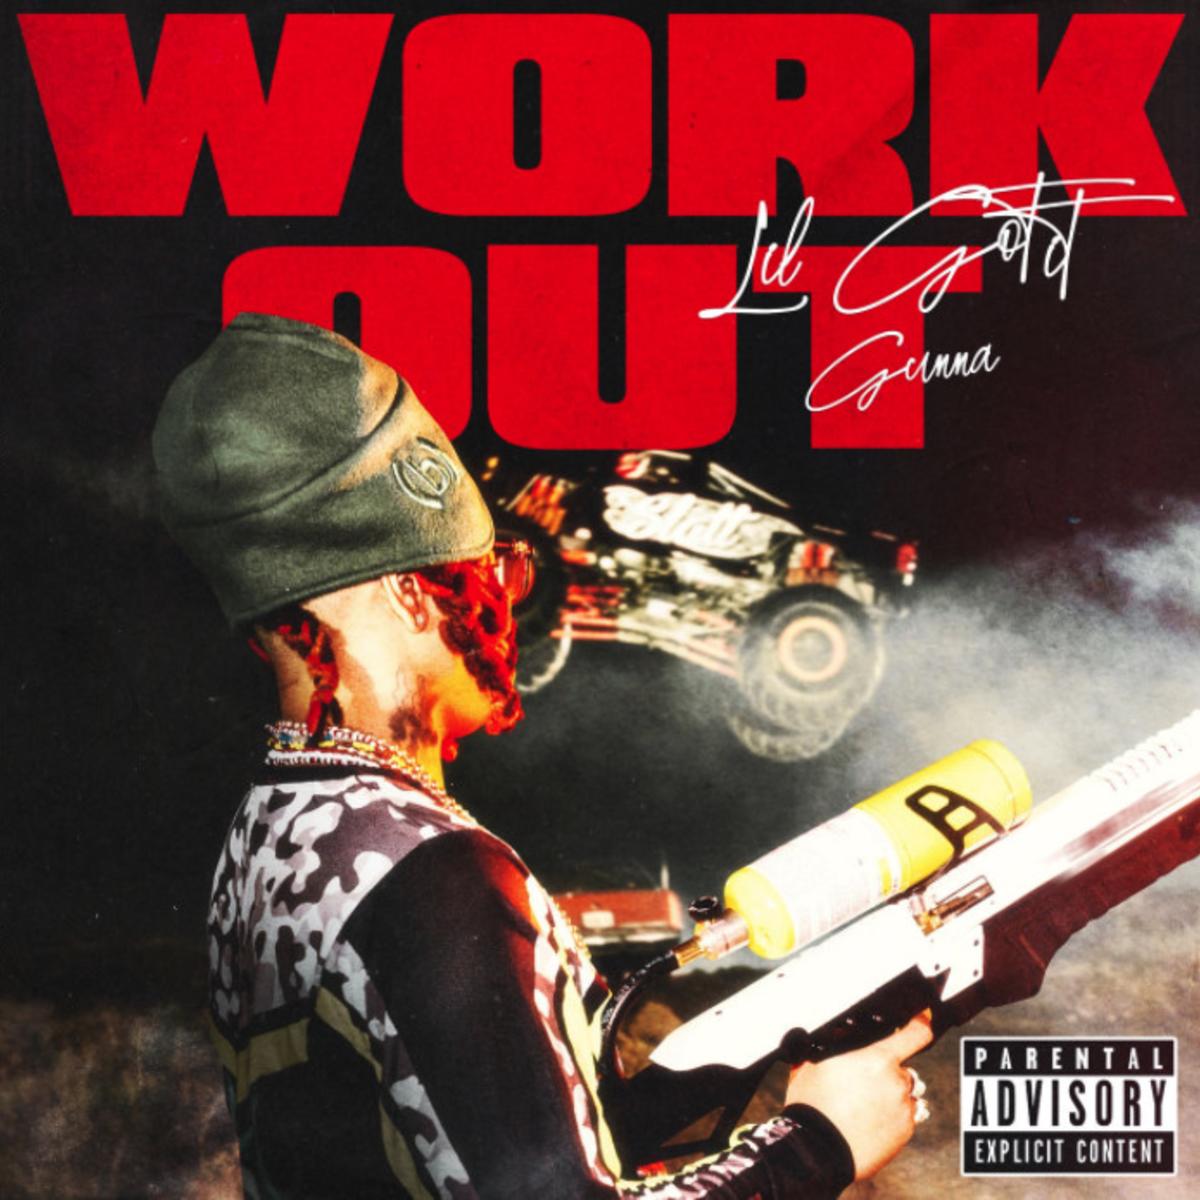 Lil Gotit Calls On Gunna For “Work Out”